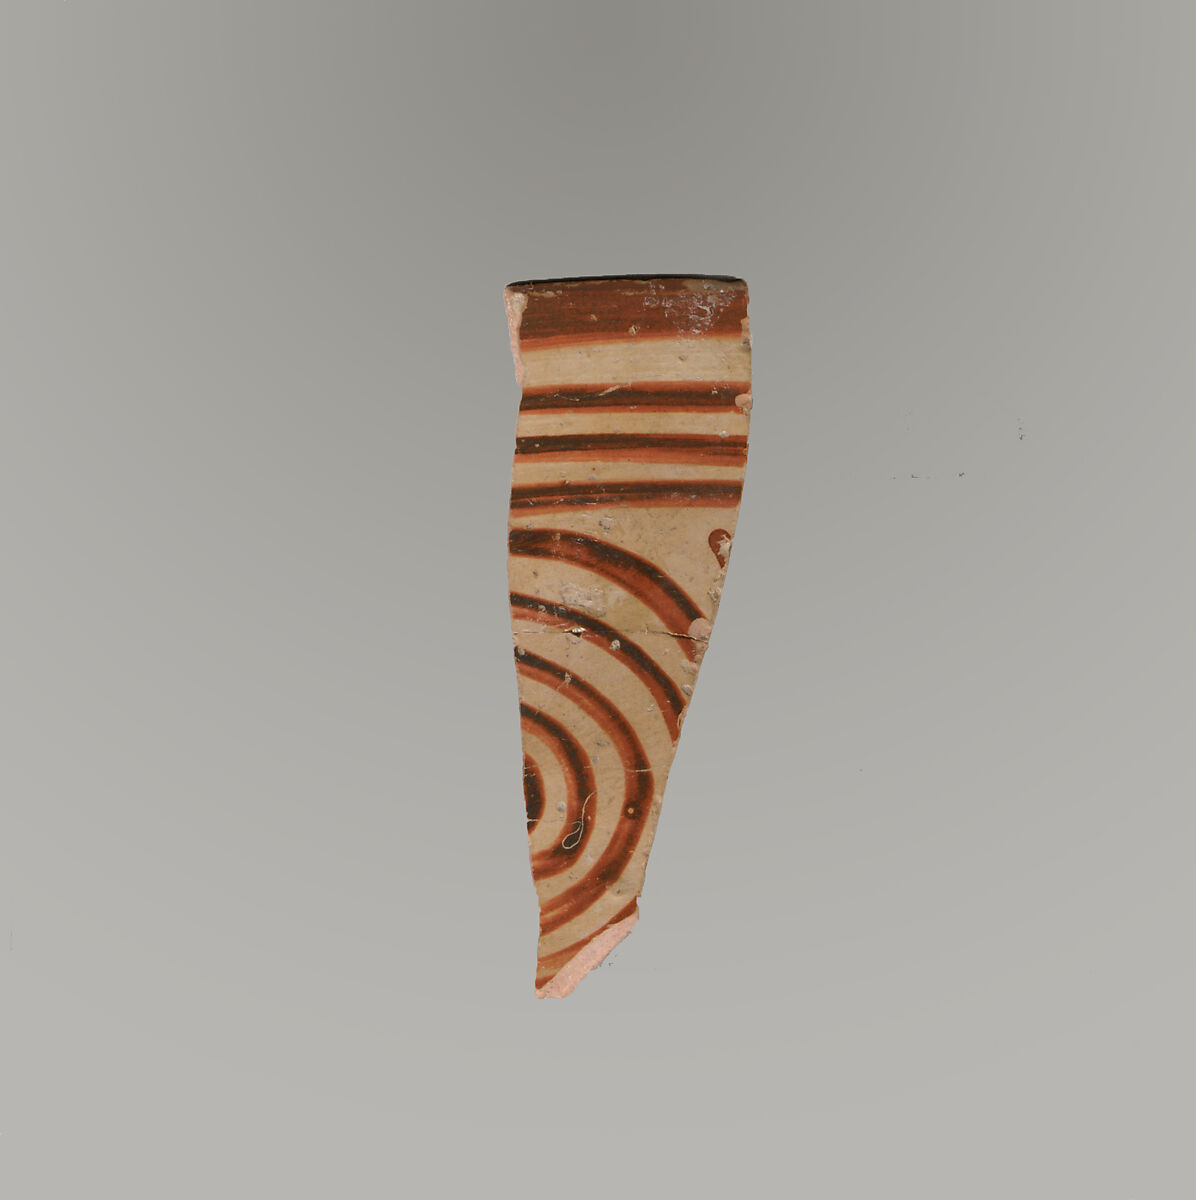 Terracotta rim and upper body fragment with concentric circles (or spiral?) and bands, Terracotta, Minoan 